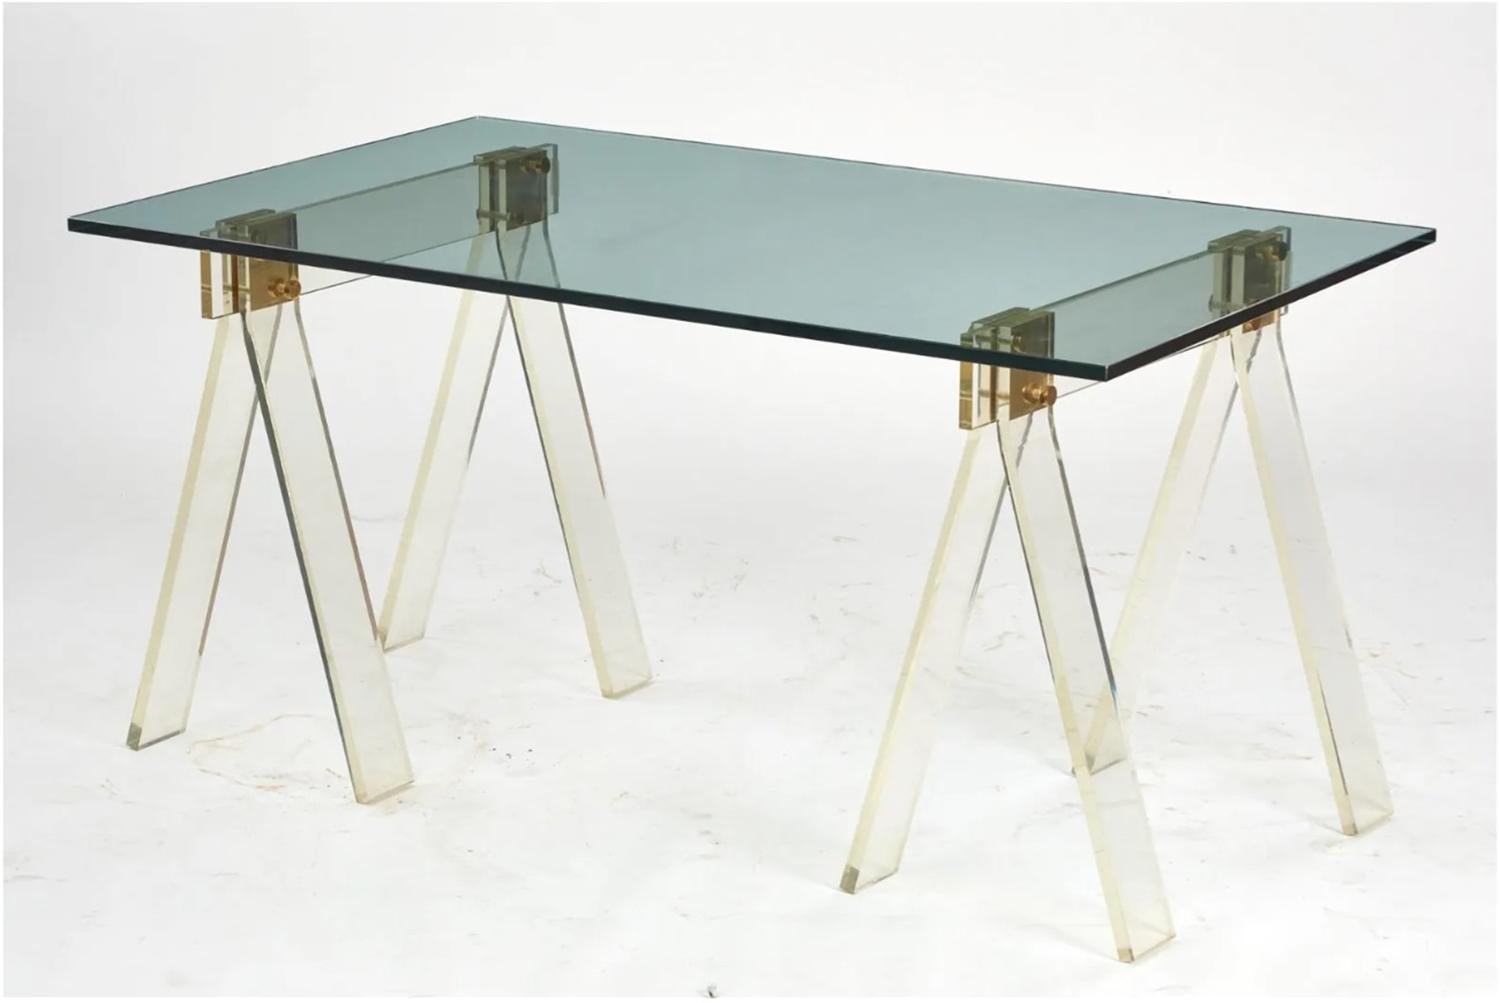 Beautiful dining table or desk made in solid Lucite, brass and a glass top.

The legs are made in the sawhorse frame with brass hardware and a thick glass top.

The base can fit a larger glass.

Measurements:
60 inches wide x 35.50 inches